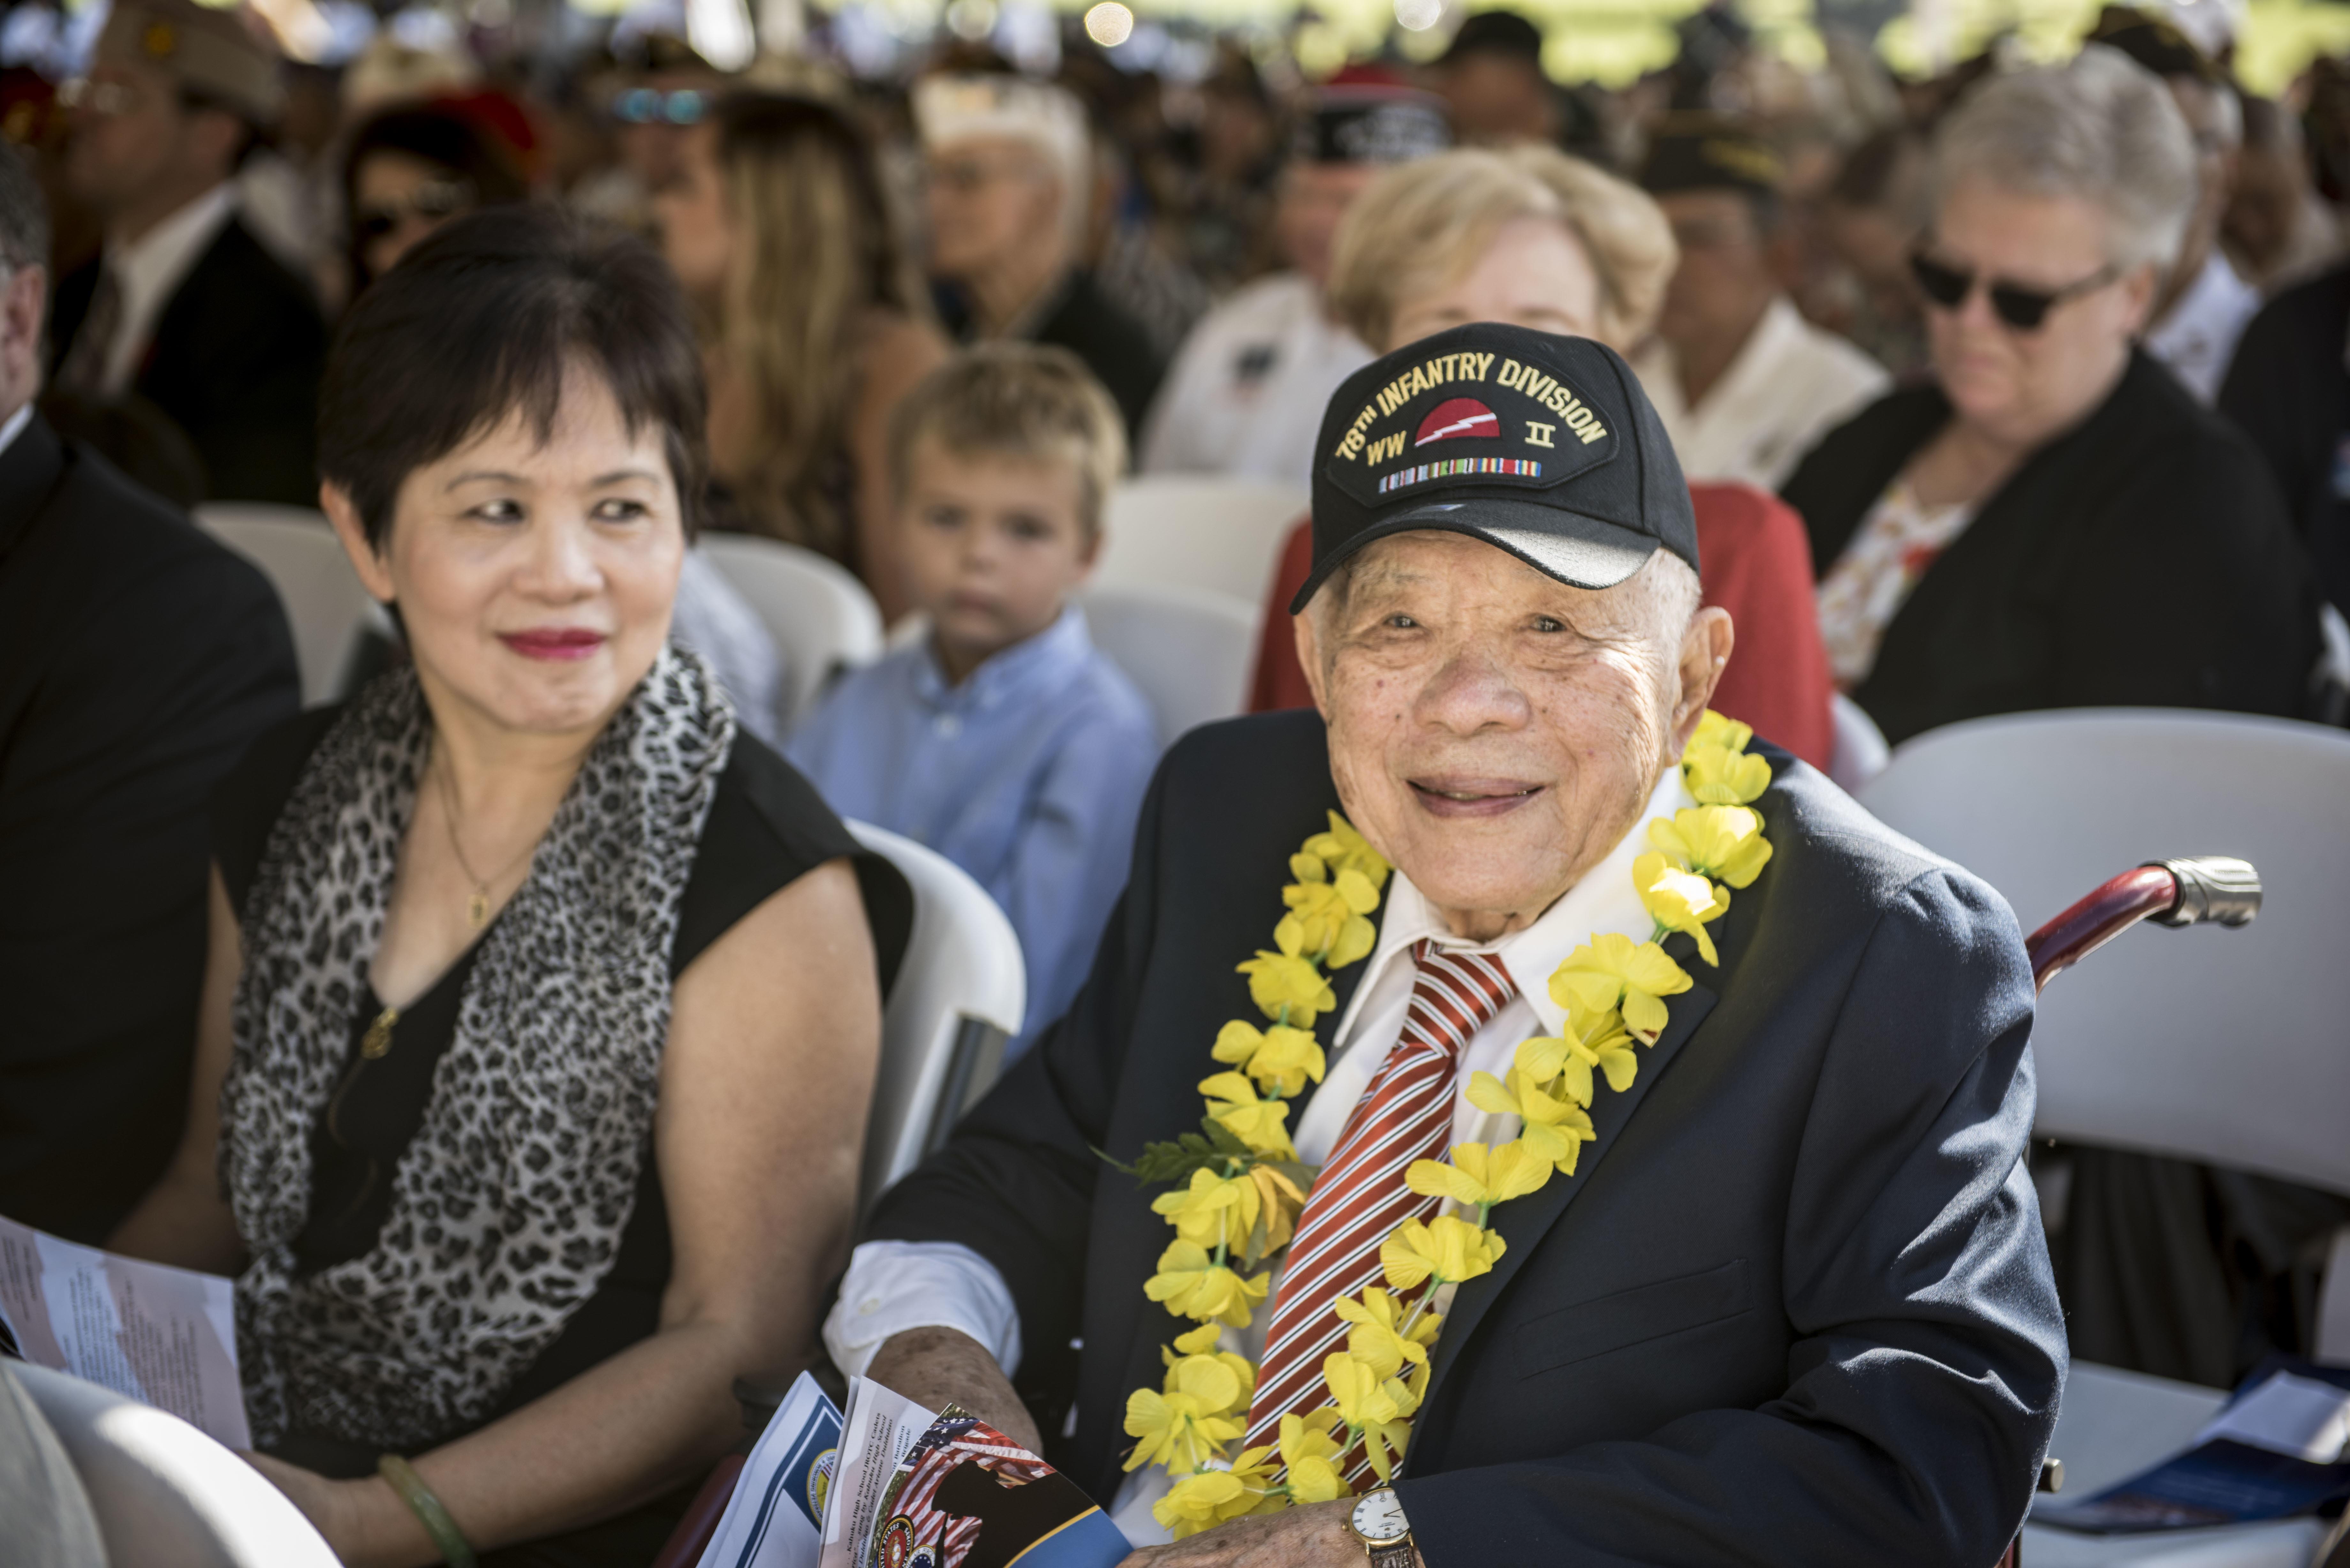 World War II veteran Daniel Lau attends a Veterans Day ceremony at the National Memorial Cemetery of the Pacific in Honolulu.